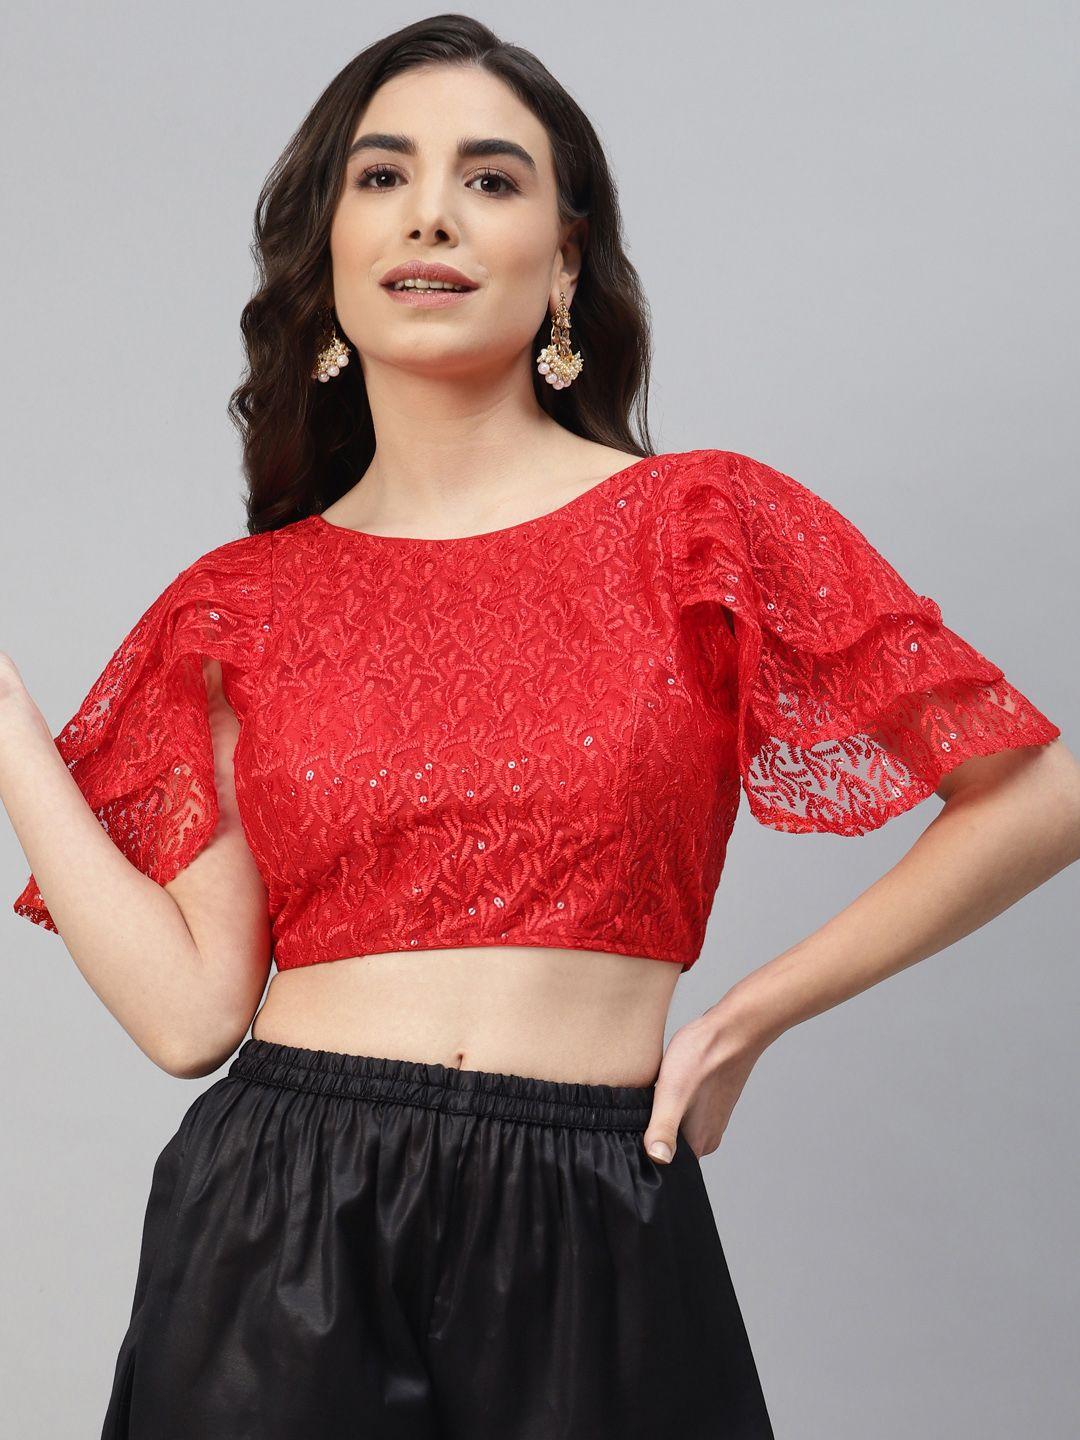 shopgarb women red sequined padded saree blouse